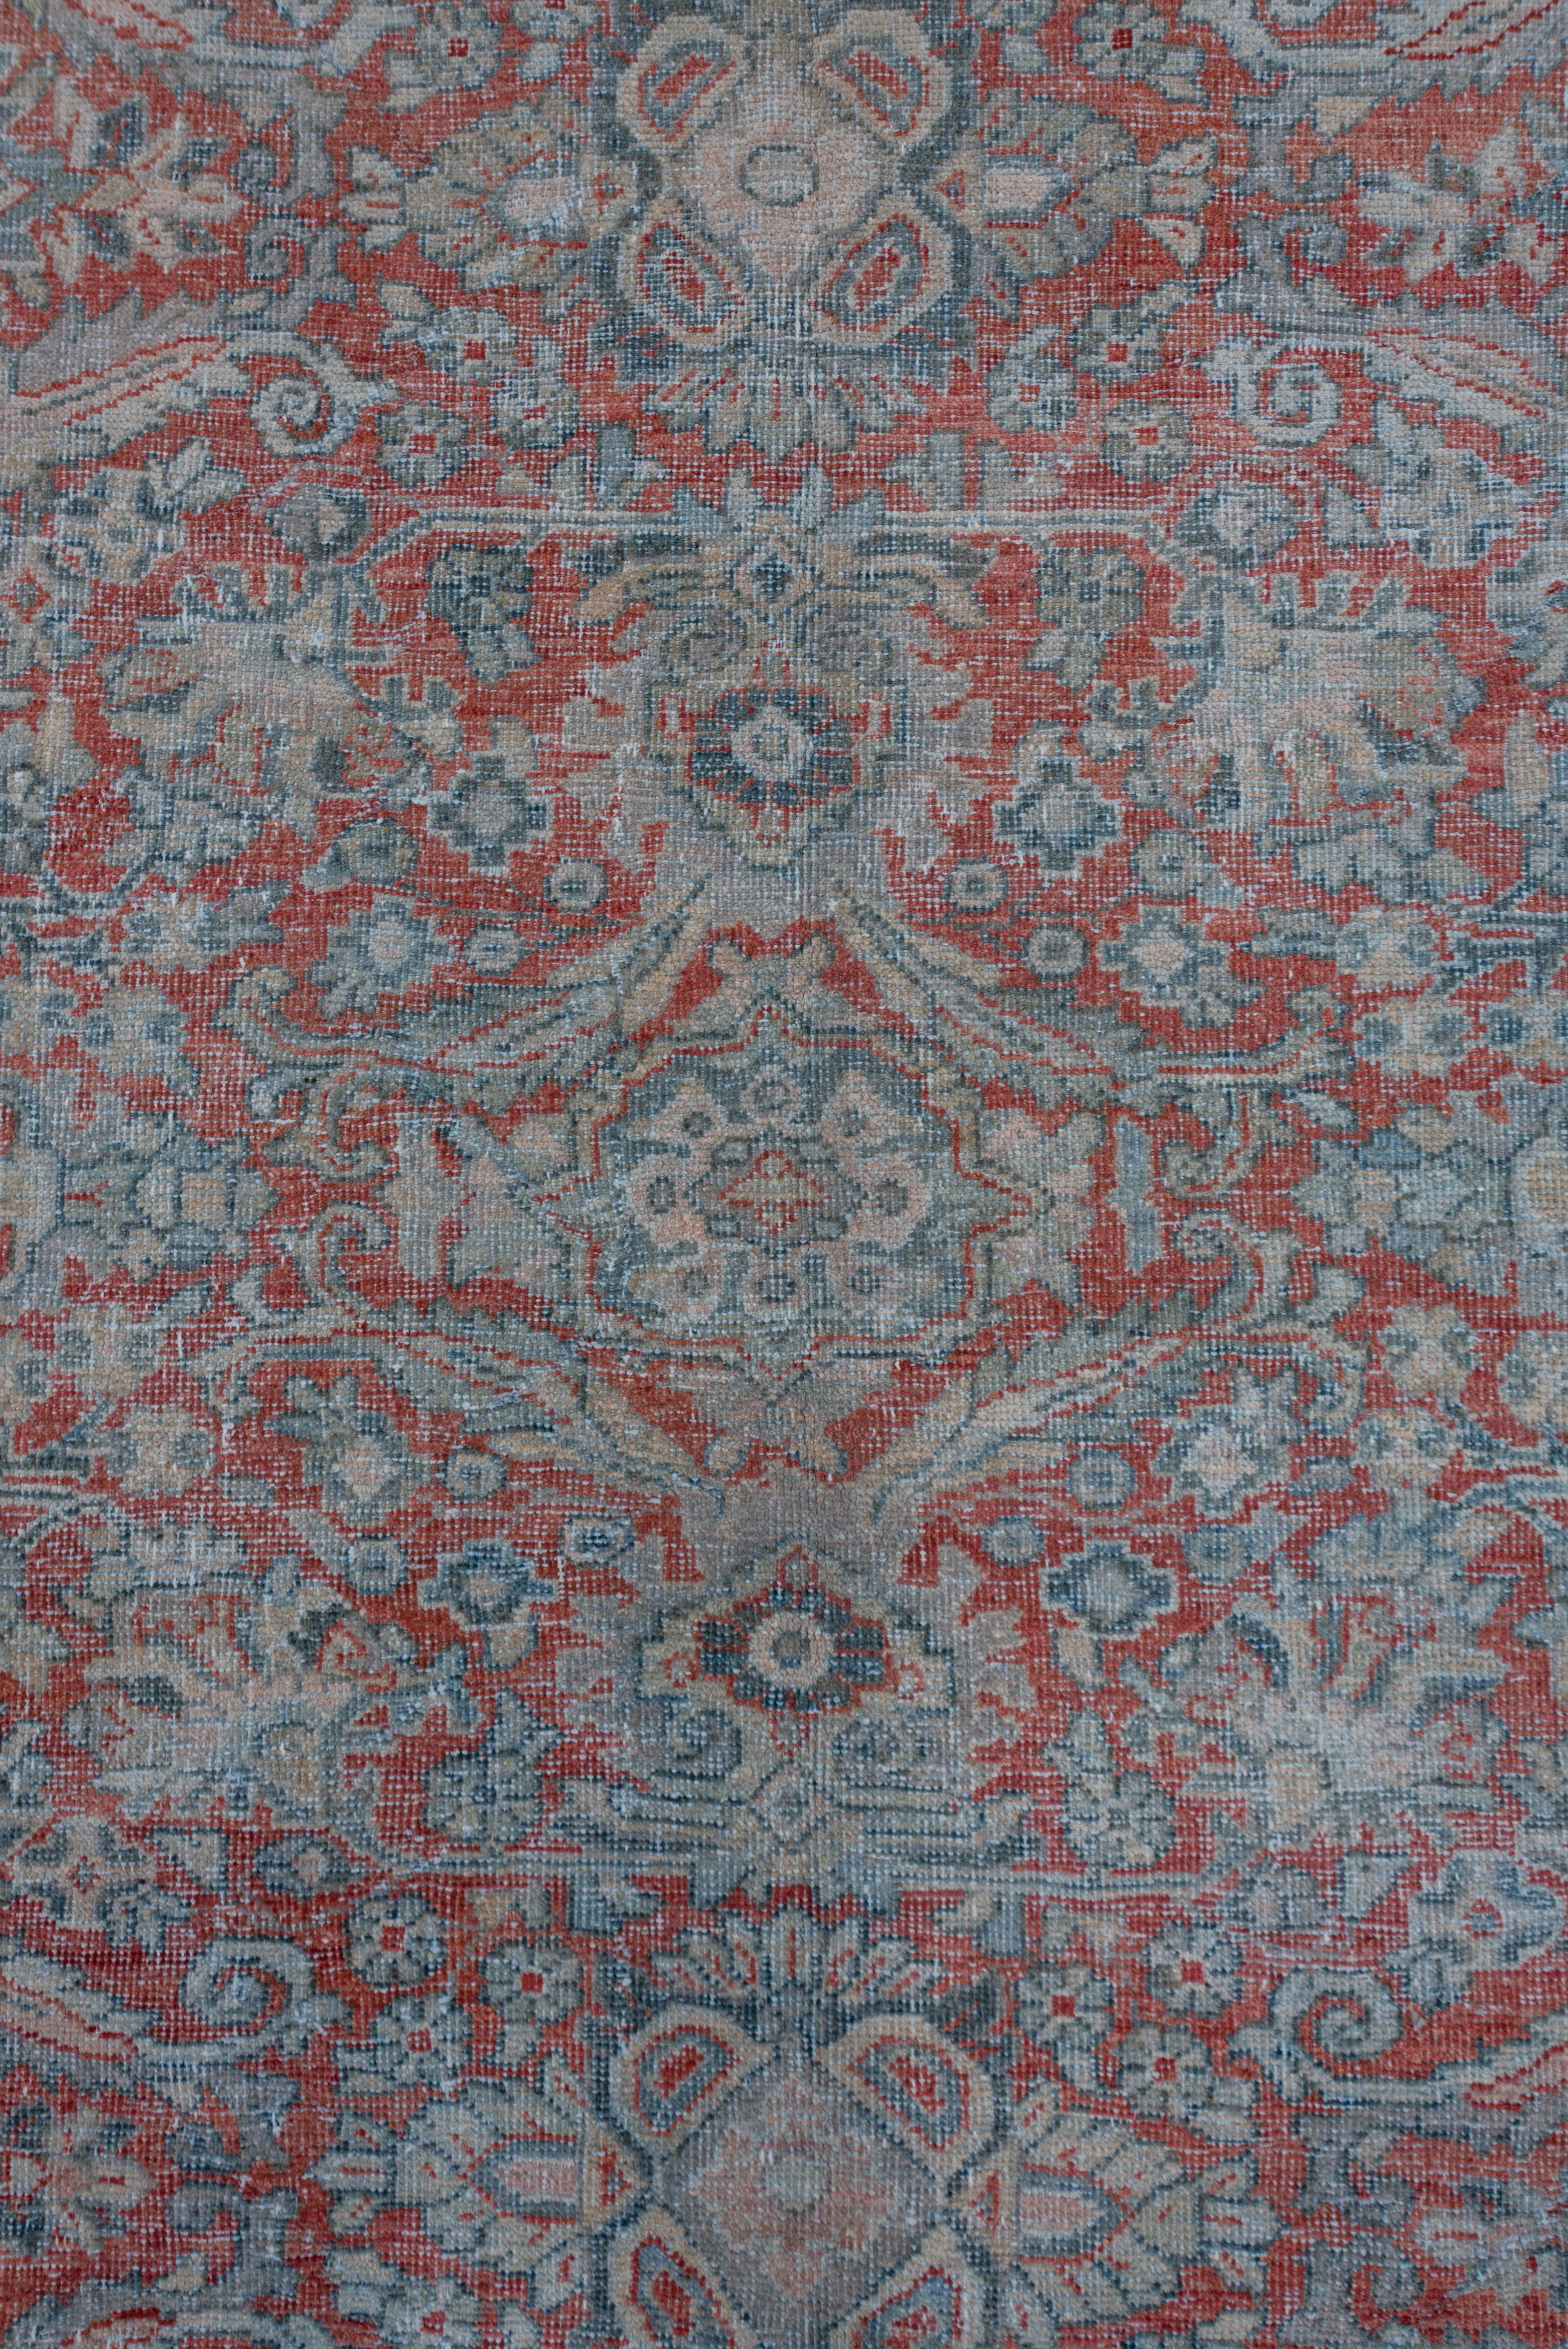 The madder red field displays an all-over design in a general Herati style, but with longer lancet leaves forming broken lozenges, with attractive teal and ivory accents. The slate-blue border features oblique floral sprays, rosettes and palmettes.